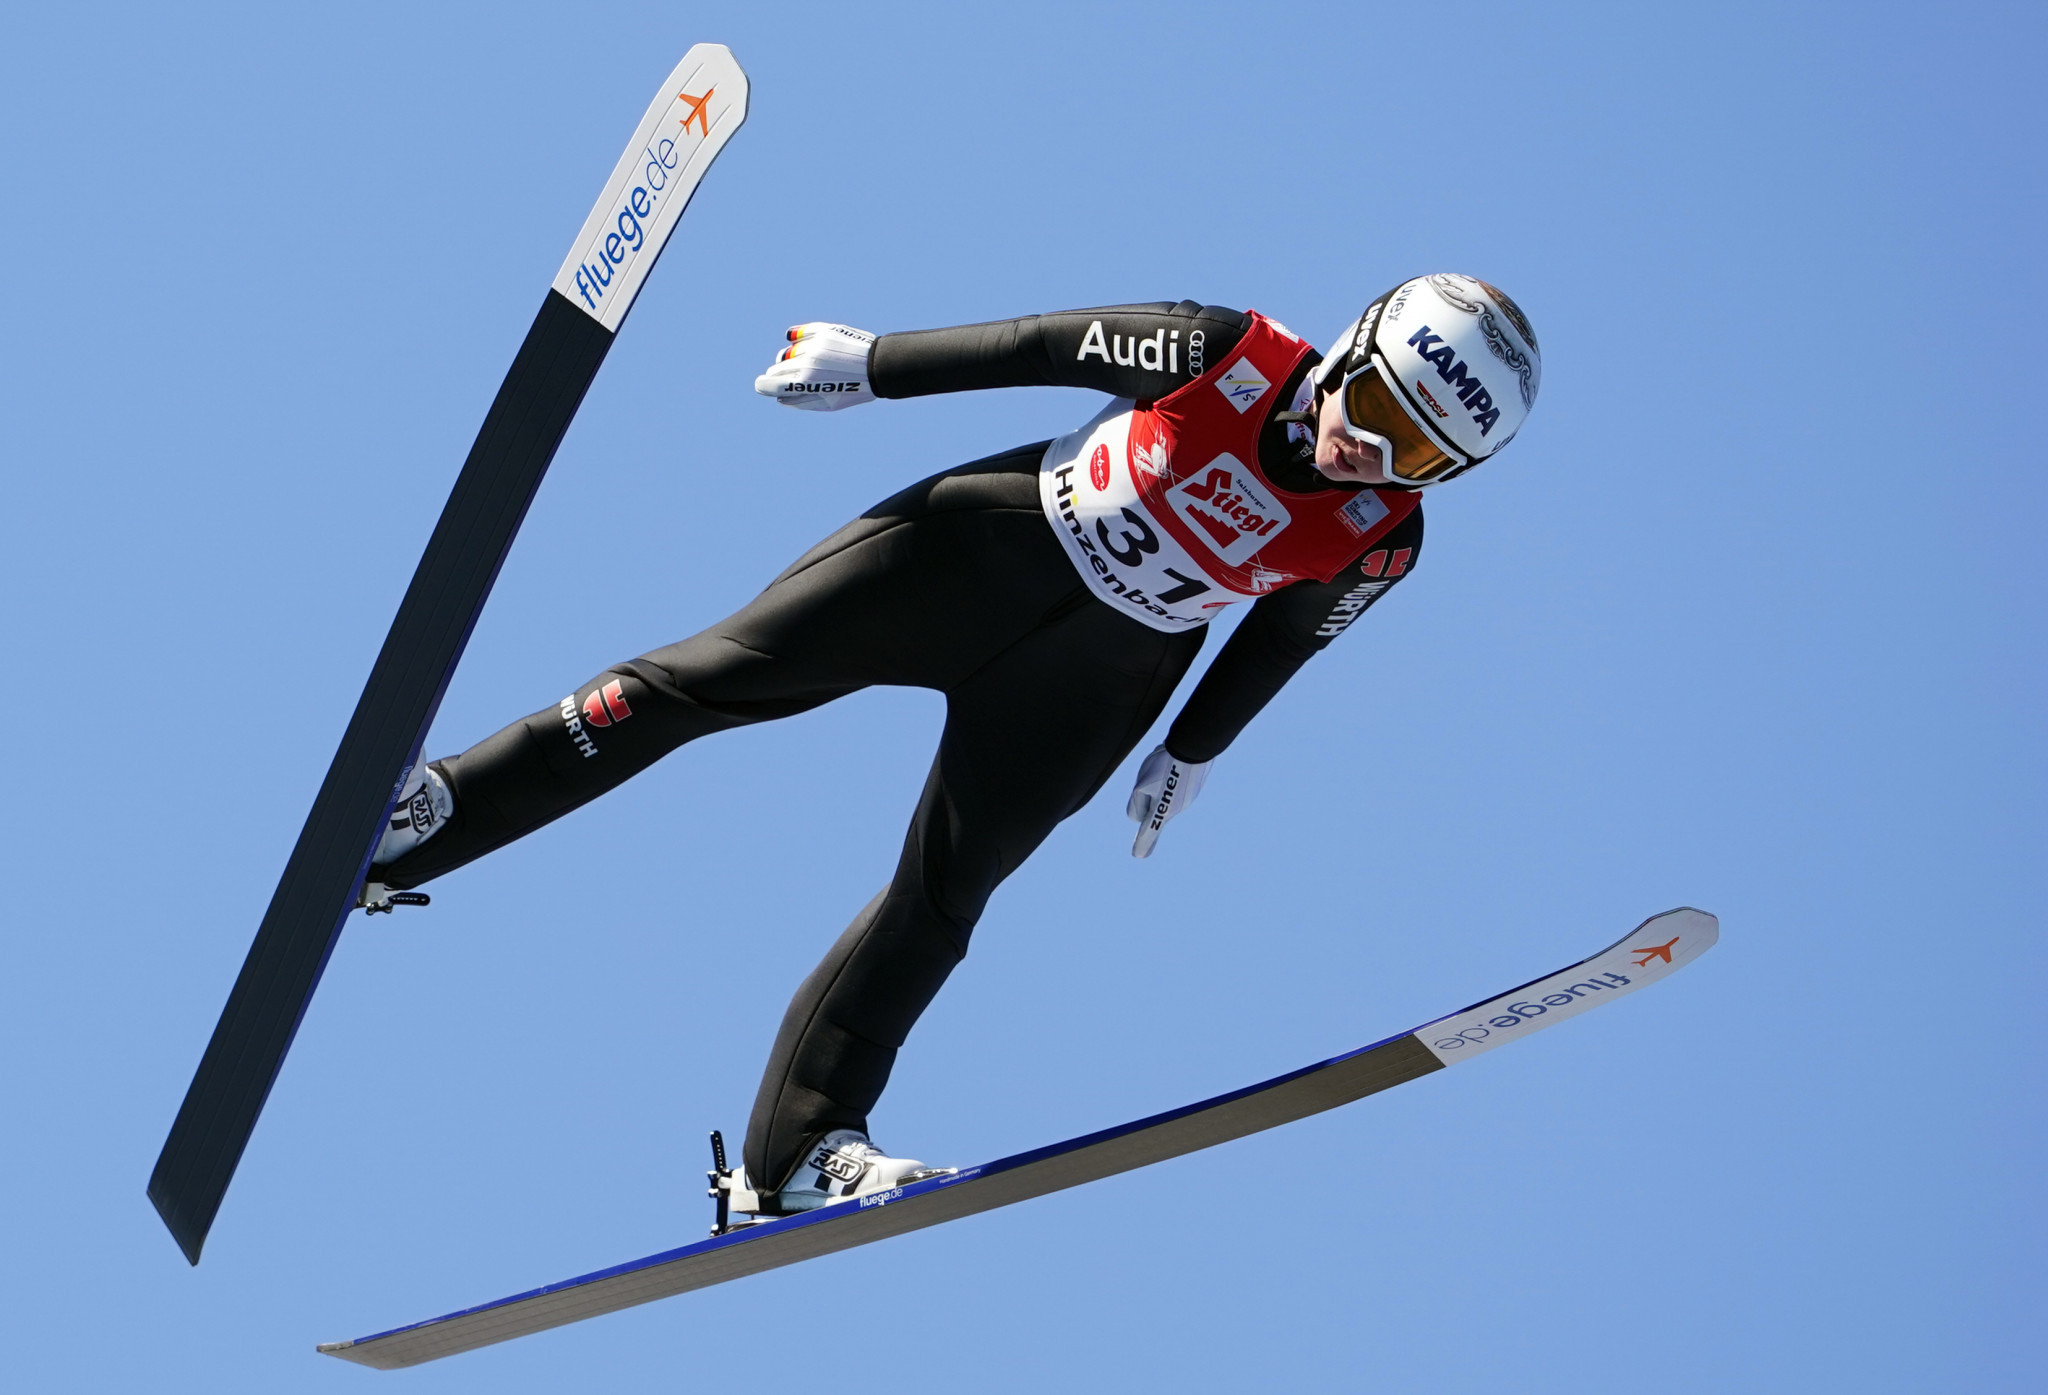 Women's large hill ski jumping will feature at the Nordic World Ski Championships for the first time in 2021 ©Getty Images